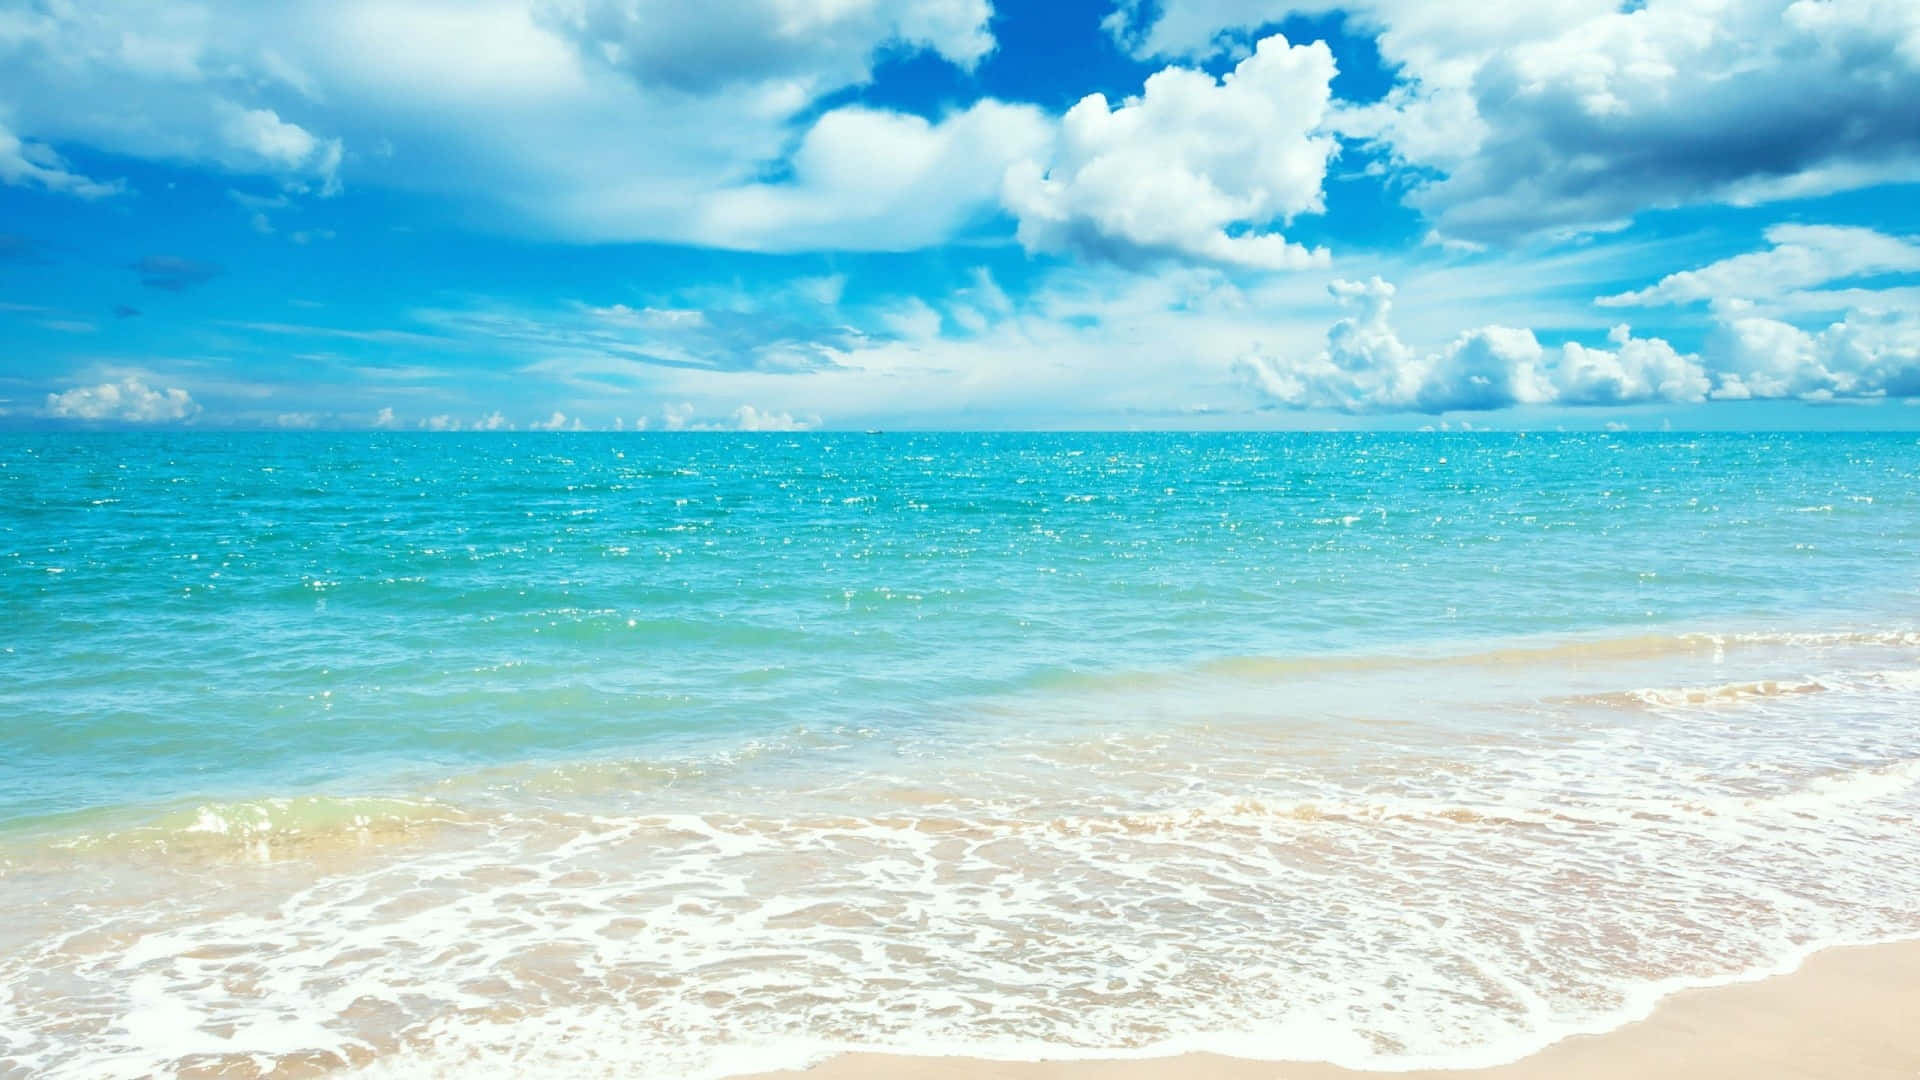 Enjoy the serene beauty of the Caribbean at this breathtaking beach. Wallpaper